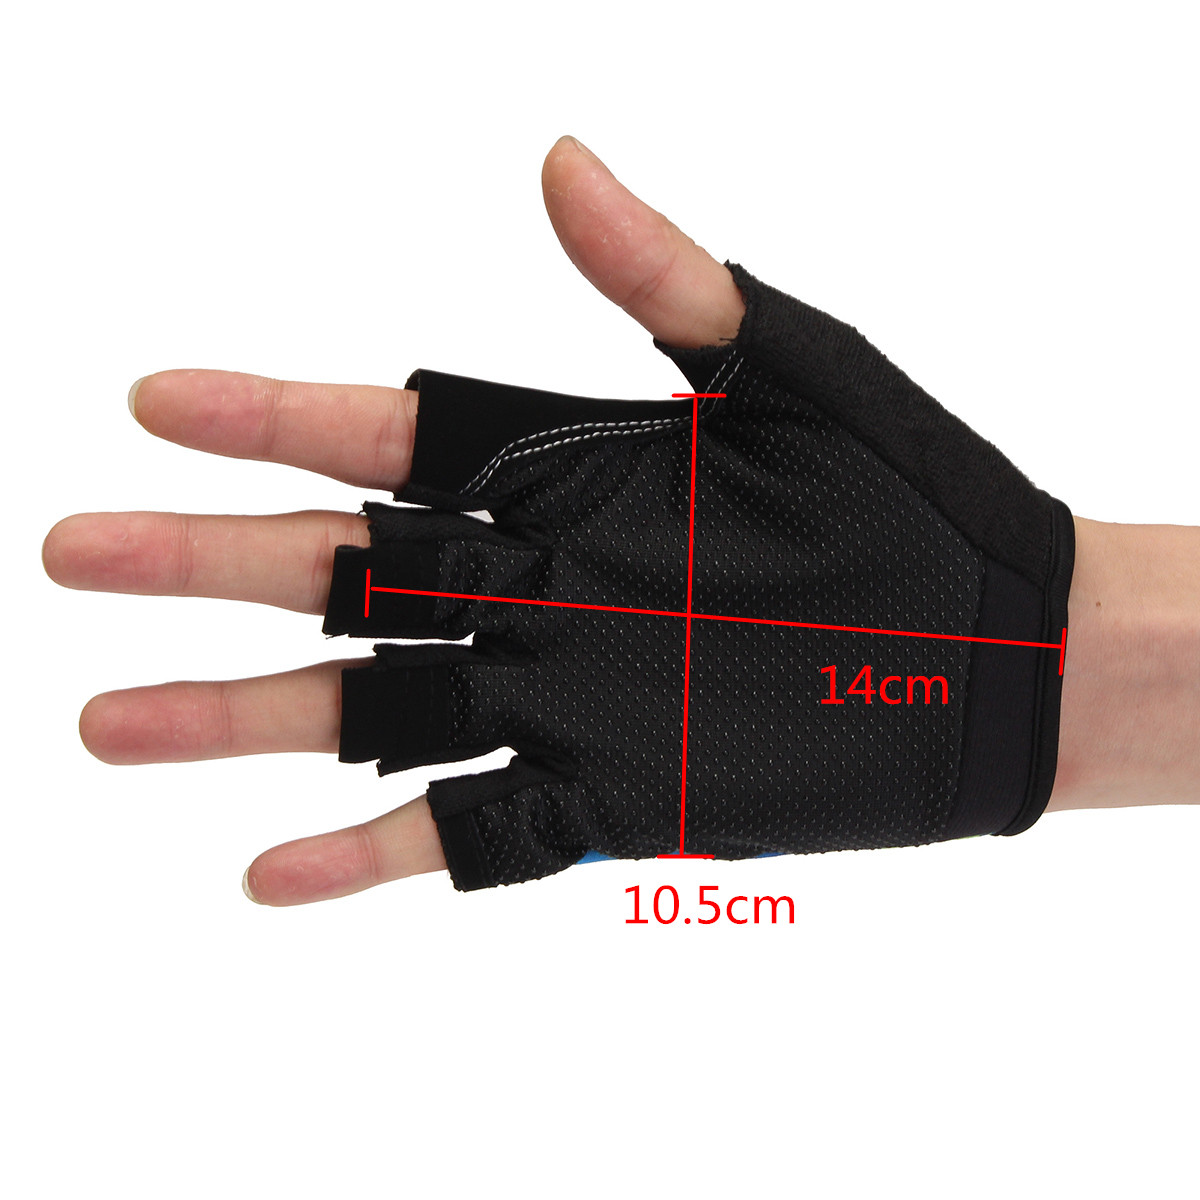 Nylon-Breathable-Motorcycle-Bicycle-Cycling-Sports-Half-Finger-Fingerless-Gloves-Mitts-1144573